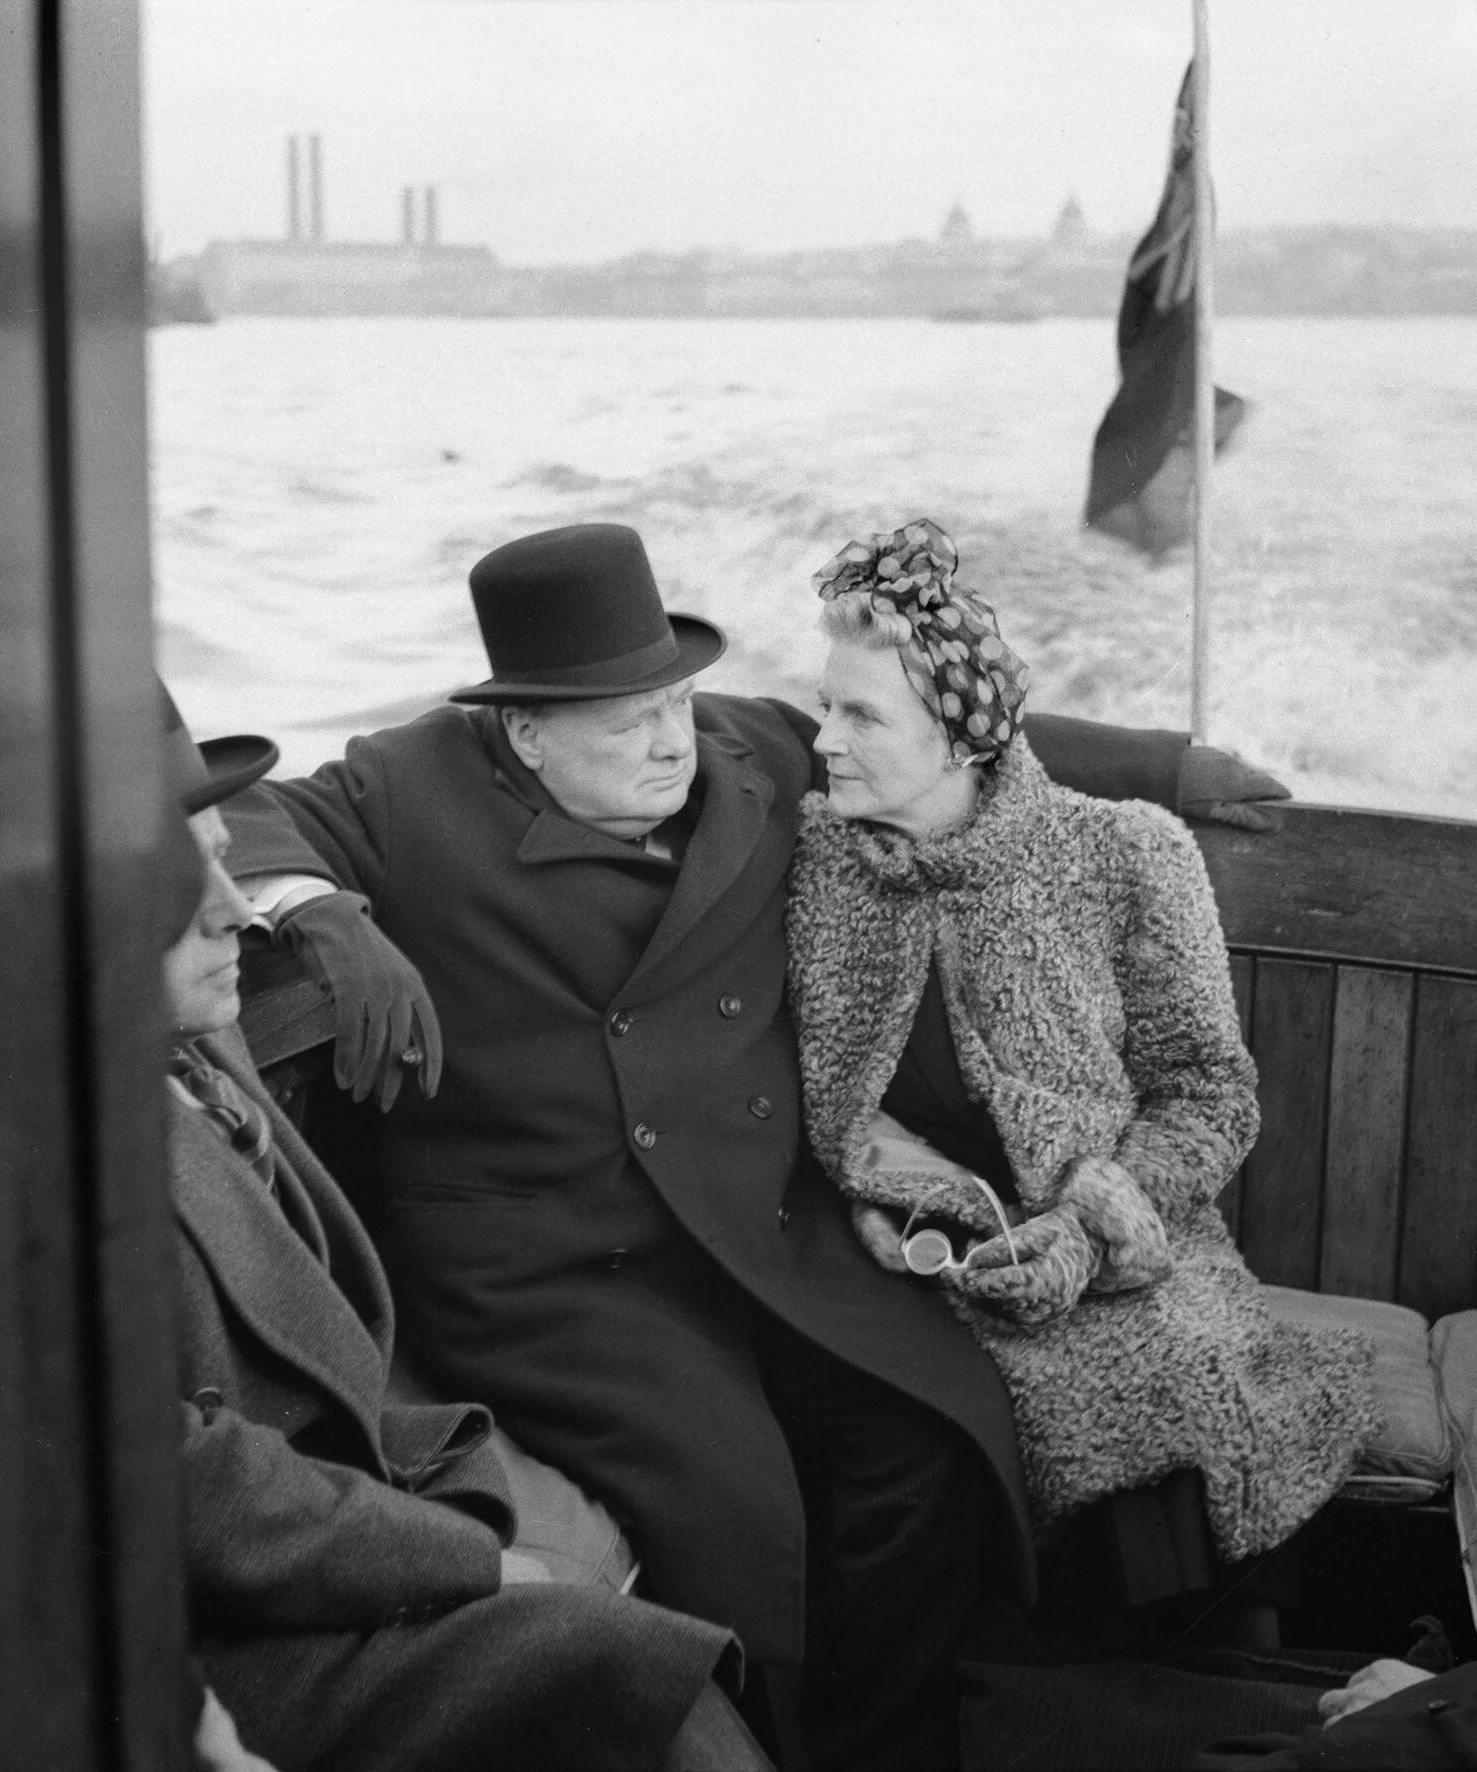 Winston Churchill and his wife, Clementine, on board a naval auxiliary patrol vessel during a visit to the London docks, 25 September 1940. H4367